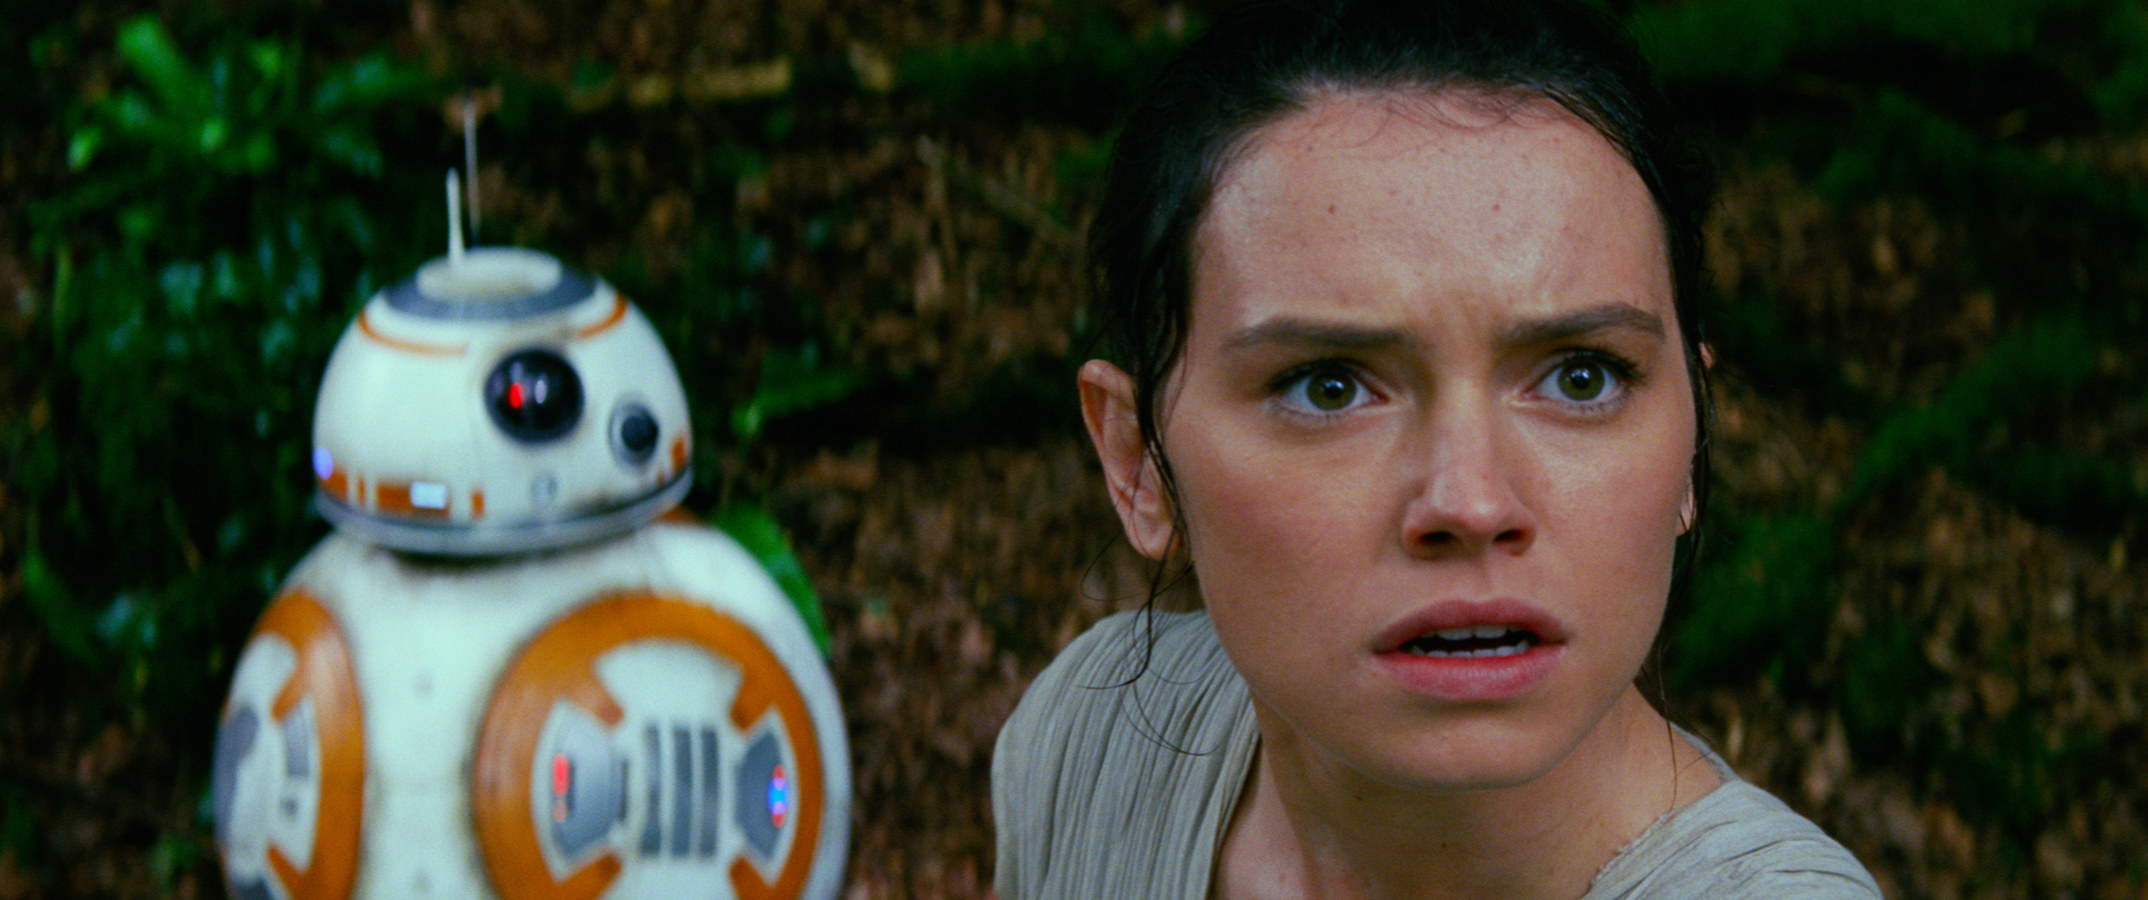 BB-8 and Daisy Ridley in Star Wars: Episode VII — The Force Awakens